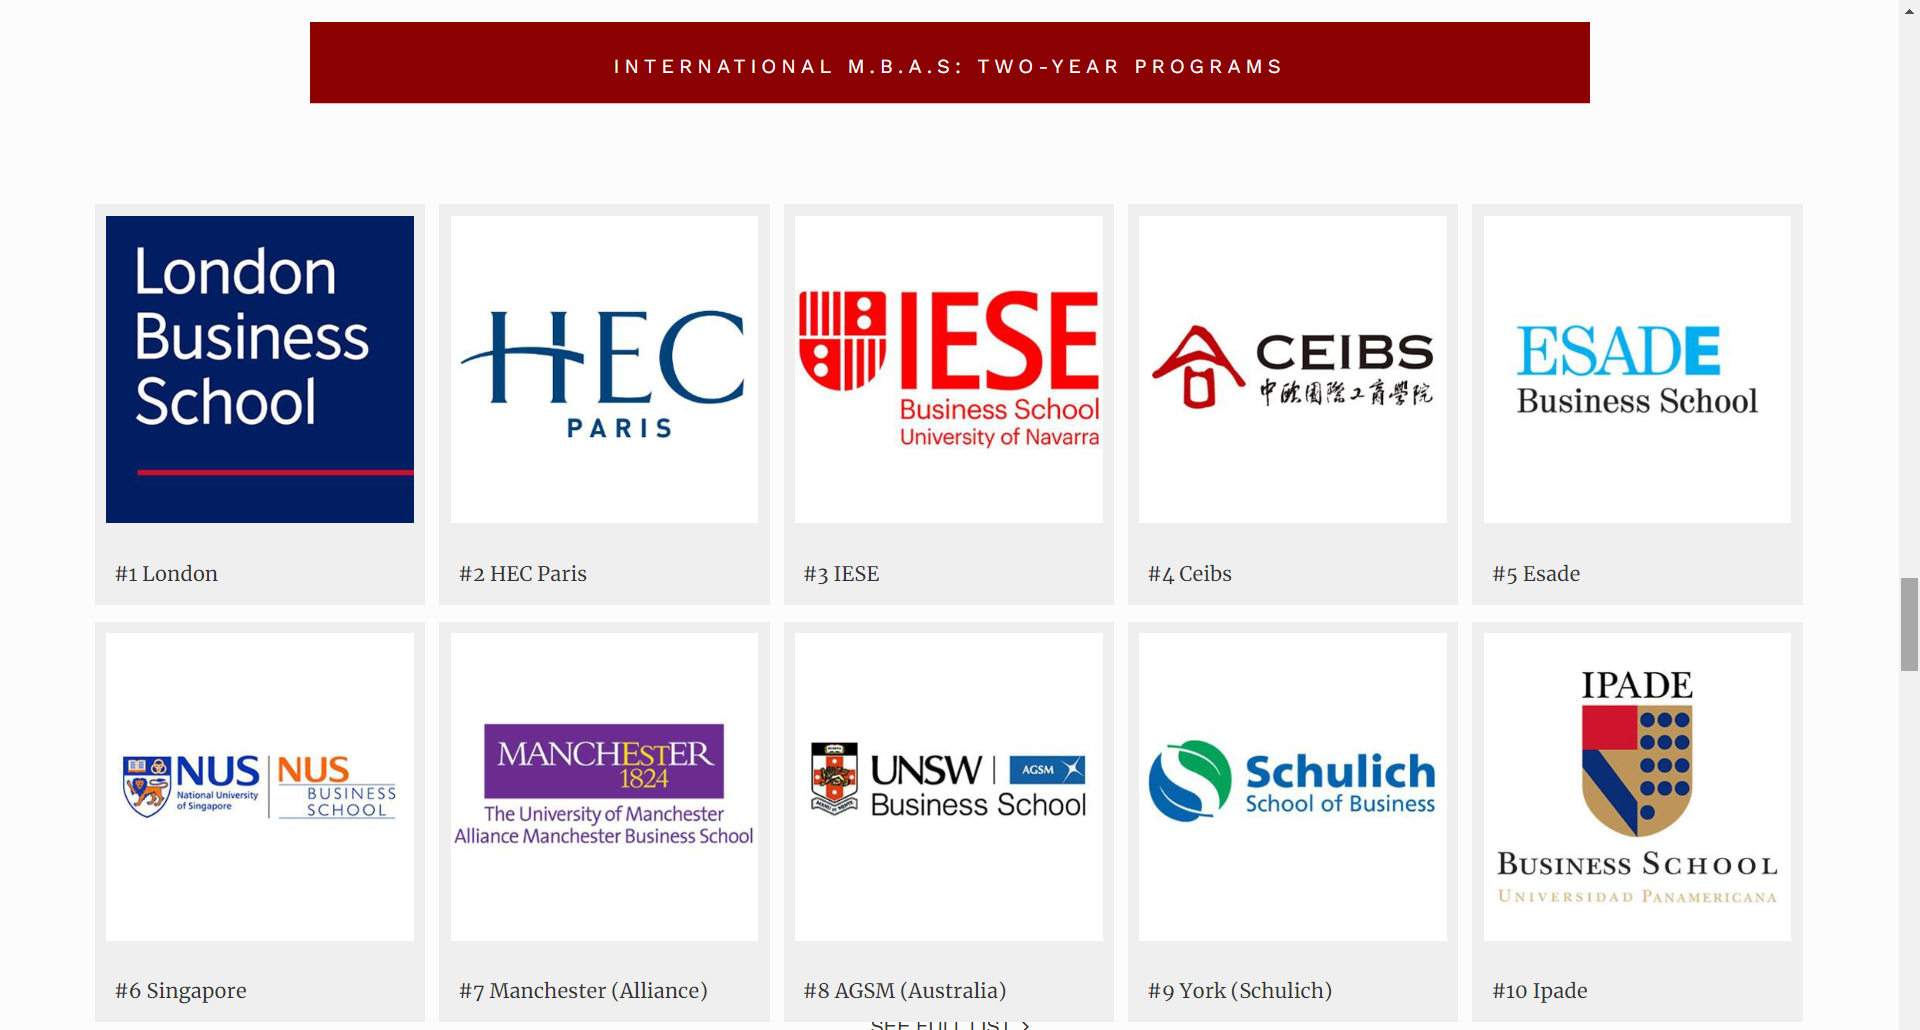 Forbes-2019-international-2-year-programs.png